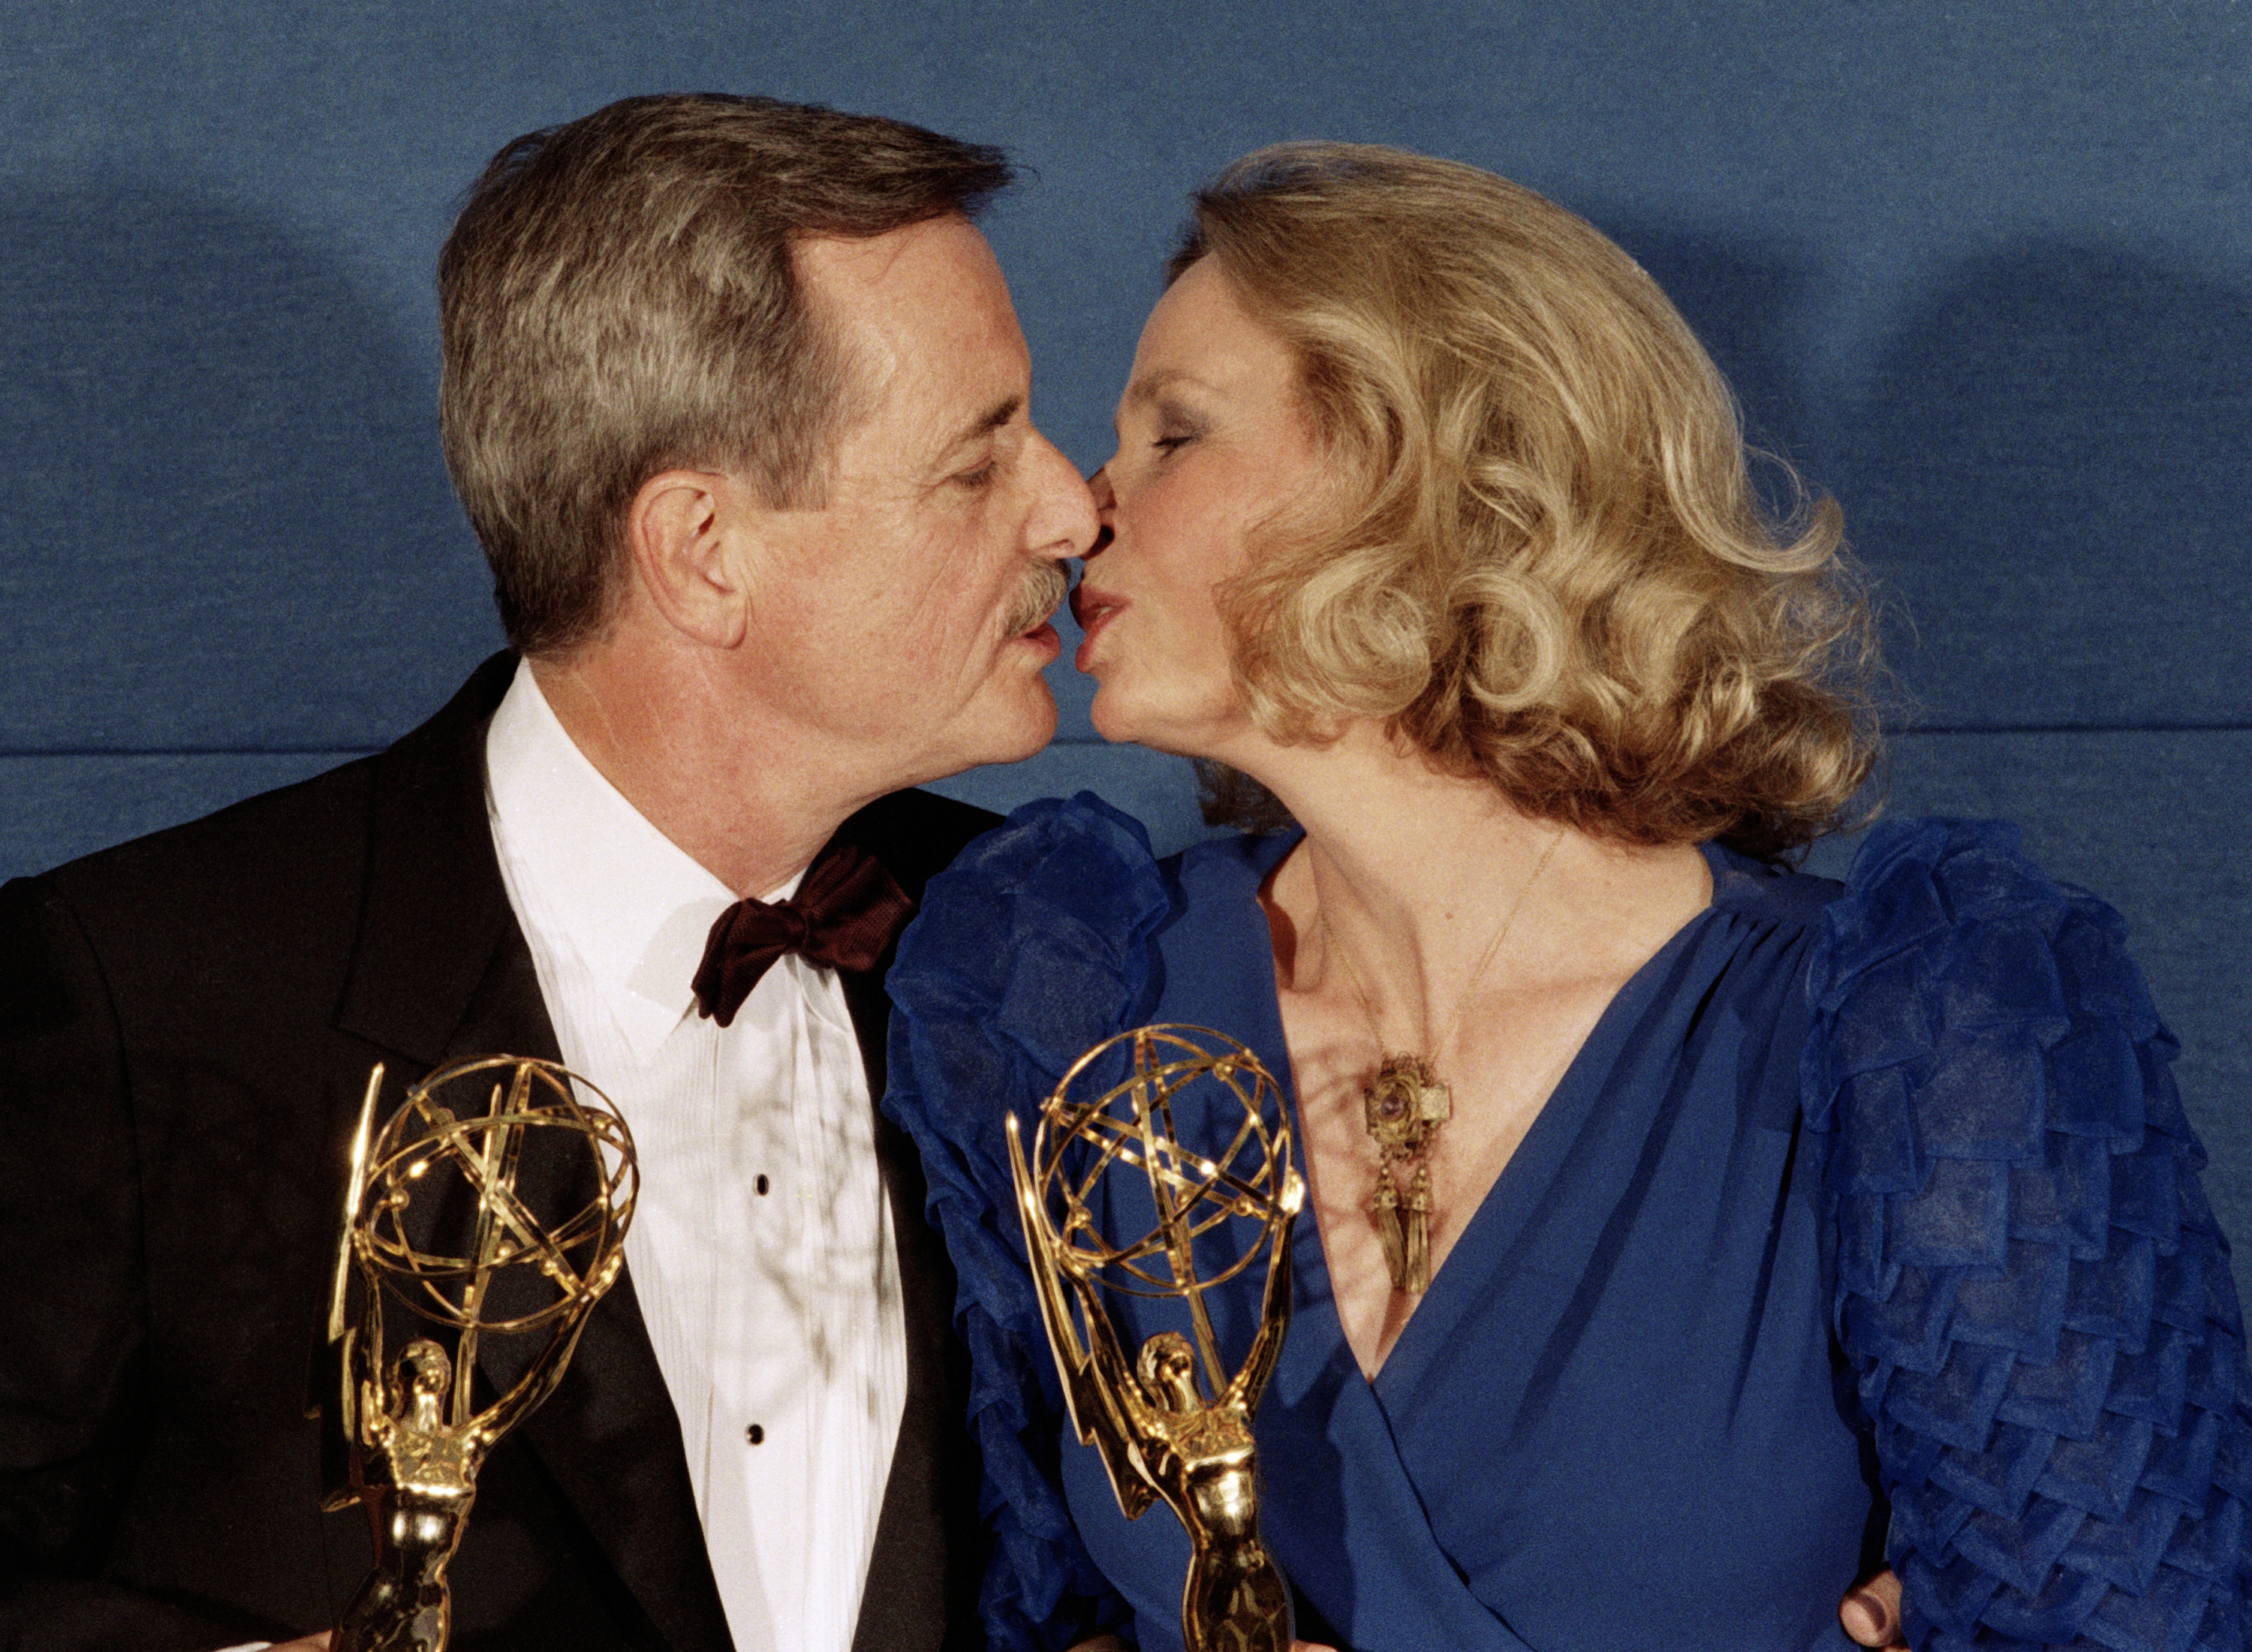 William Daniels and Bonnie Bartlett at the Emmy Awards Show, September 21, 1986 in Pasadena, California